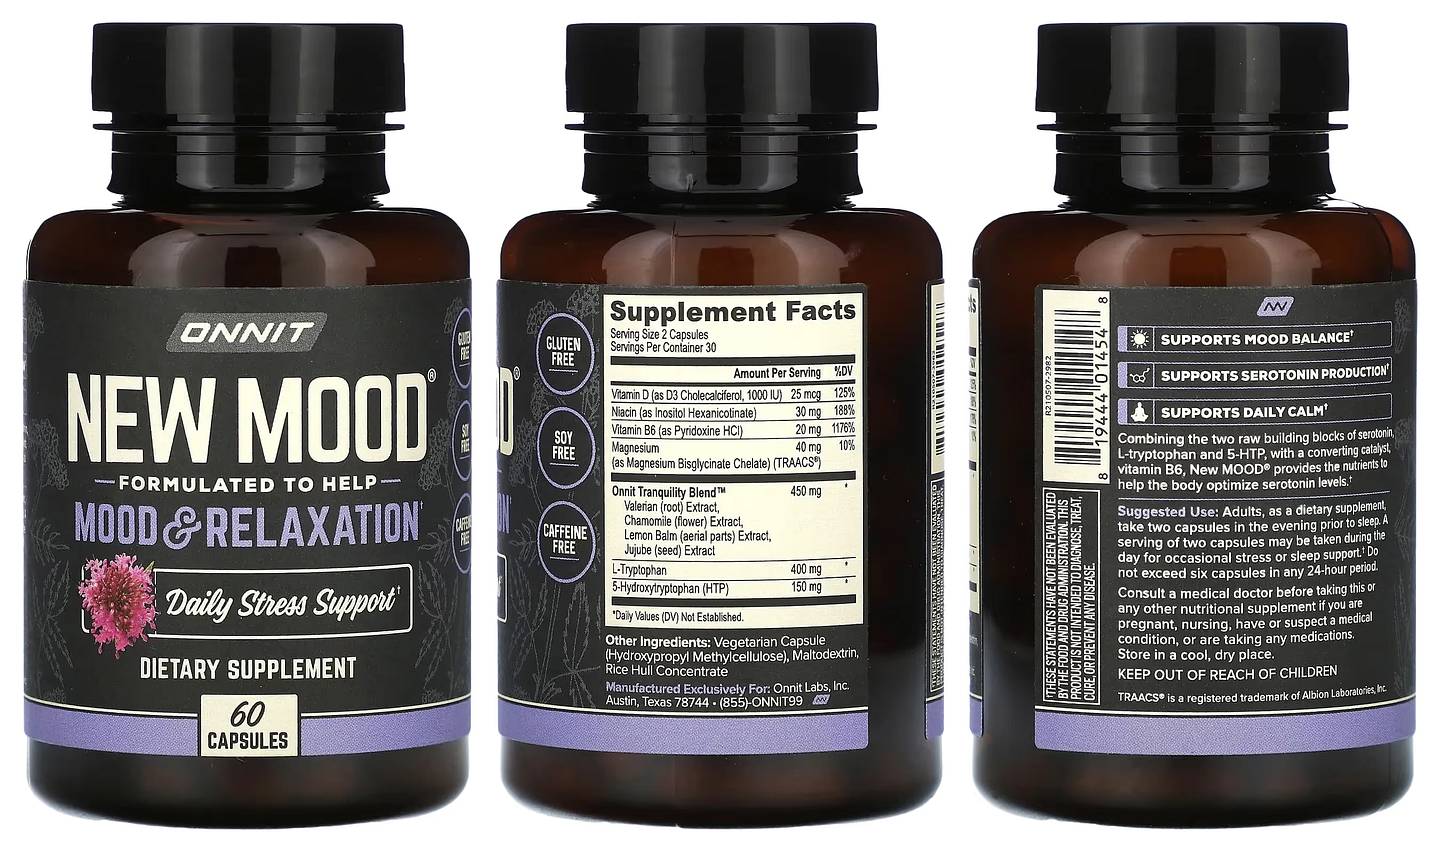 Onnit, New Mood packaging